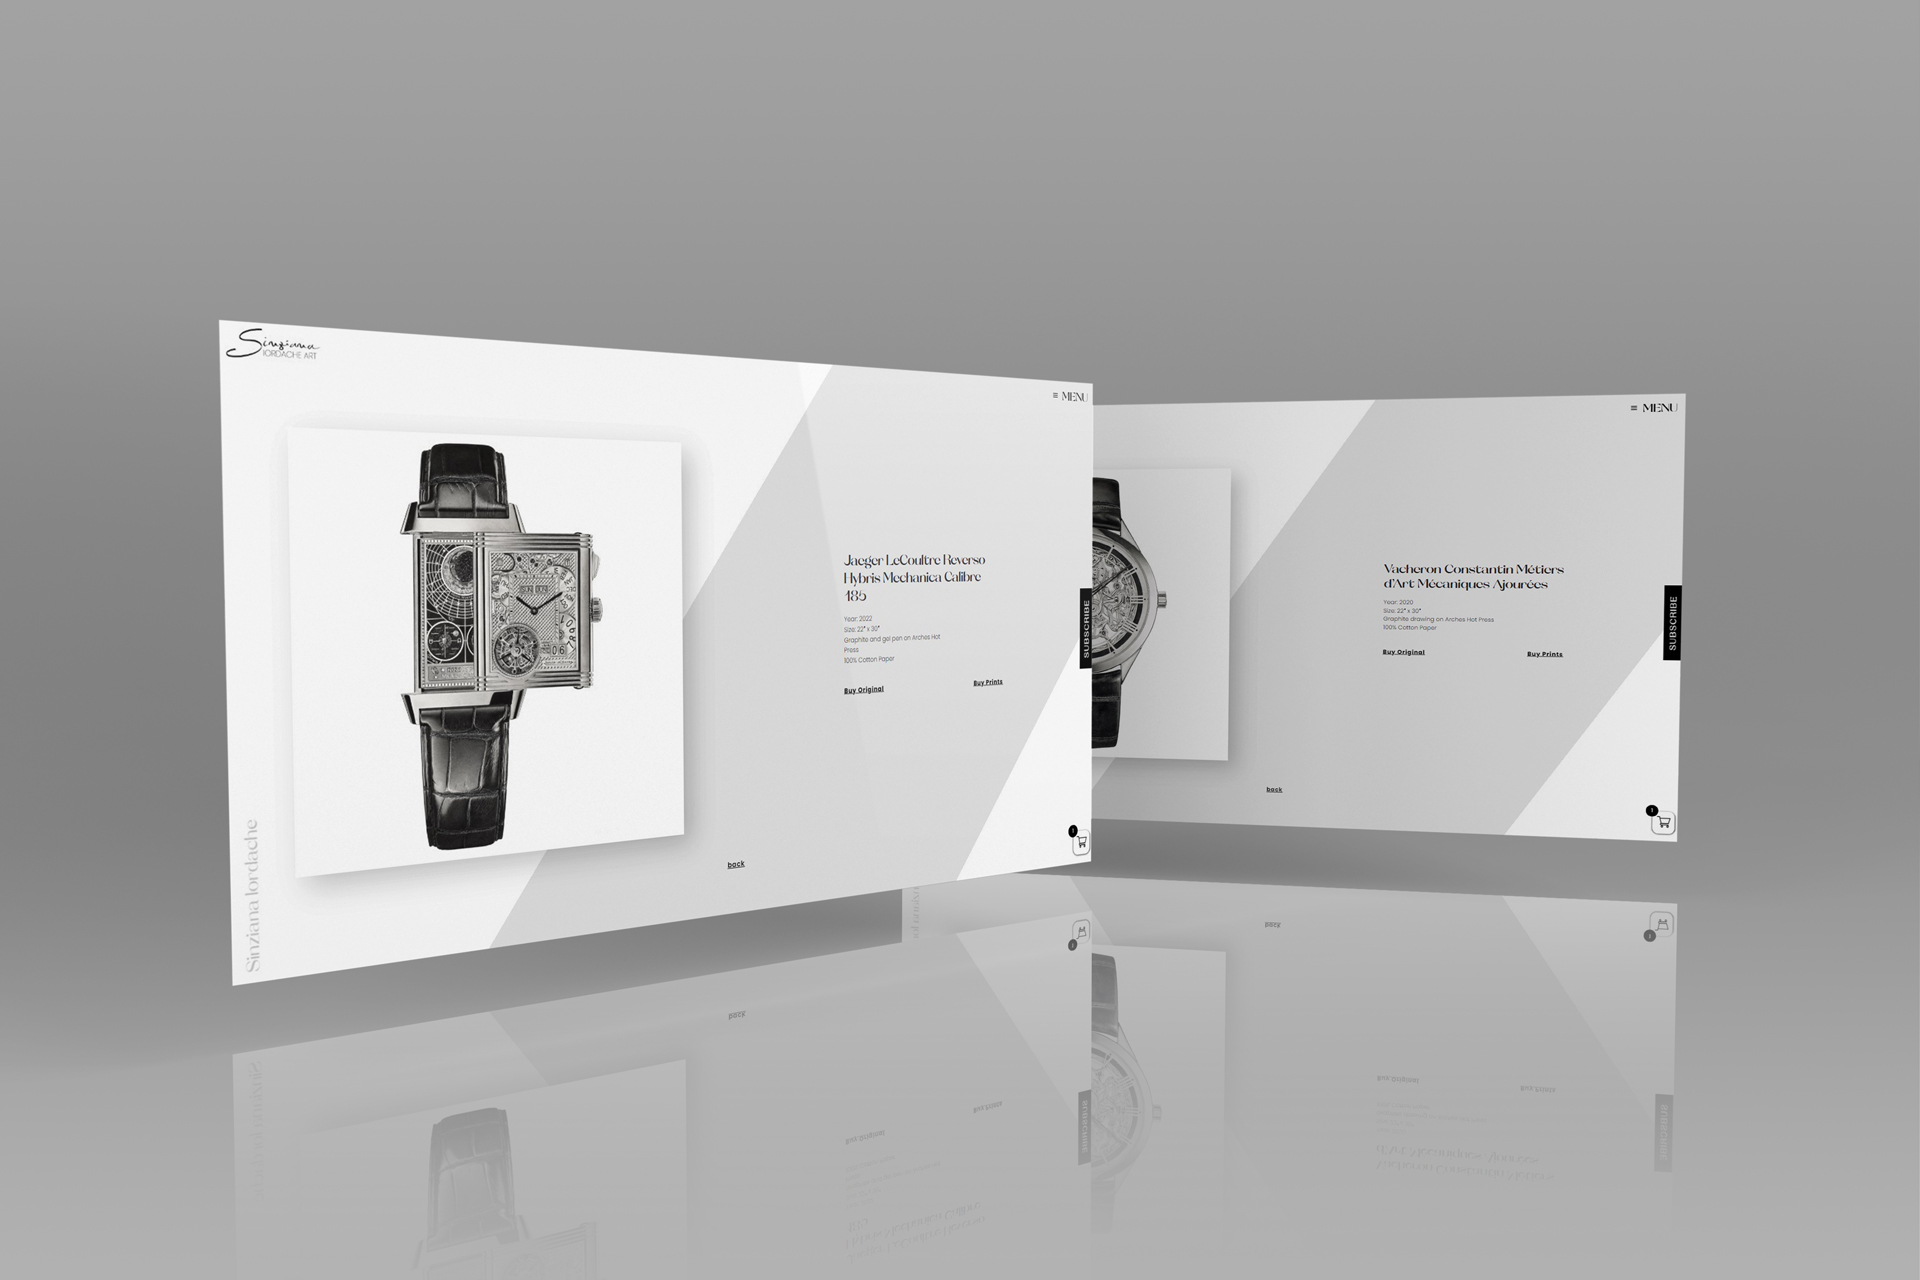 The image from PixelUp presents the Sinziana Iordache Art Project, shining a spotlight on the 'Jaeger LeCoultre Reverso Hybris Mechanica Calibre 185' gallery page. It showcases the artwork drawing image on the left side and provides descriptions on the right. Notably, details are accentuated by an angled gray background, enhancing their visibility and prominence.